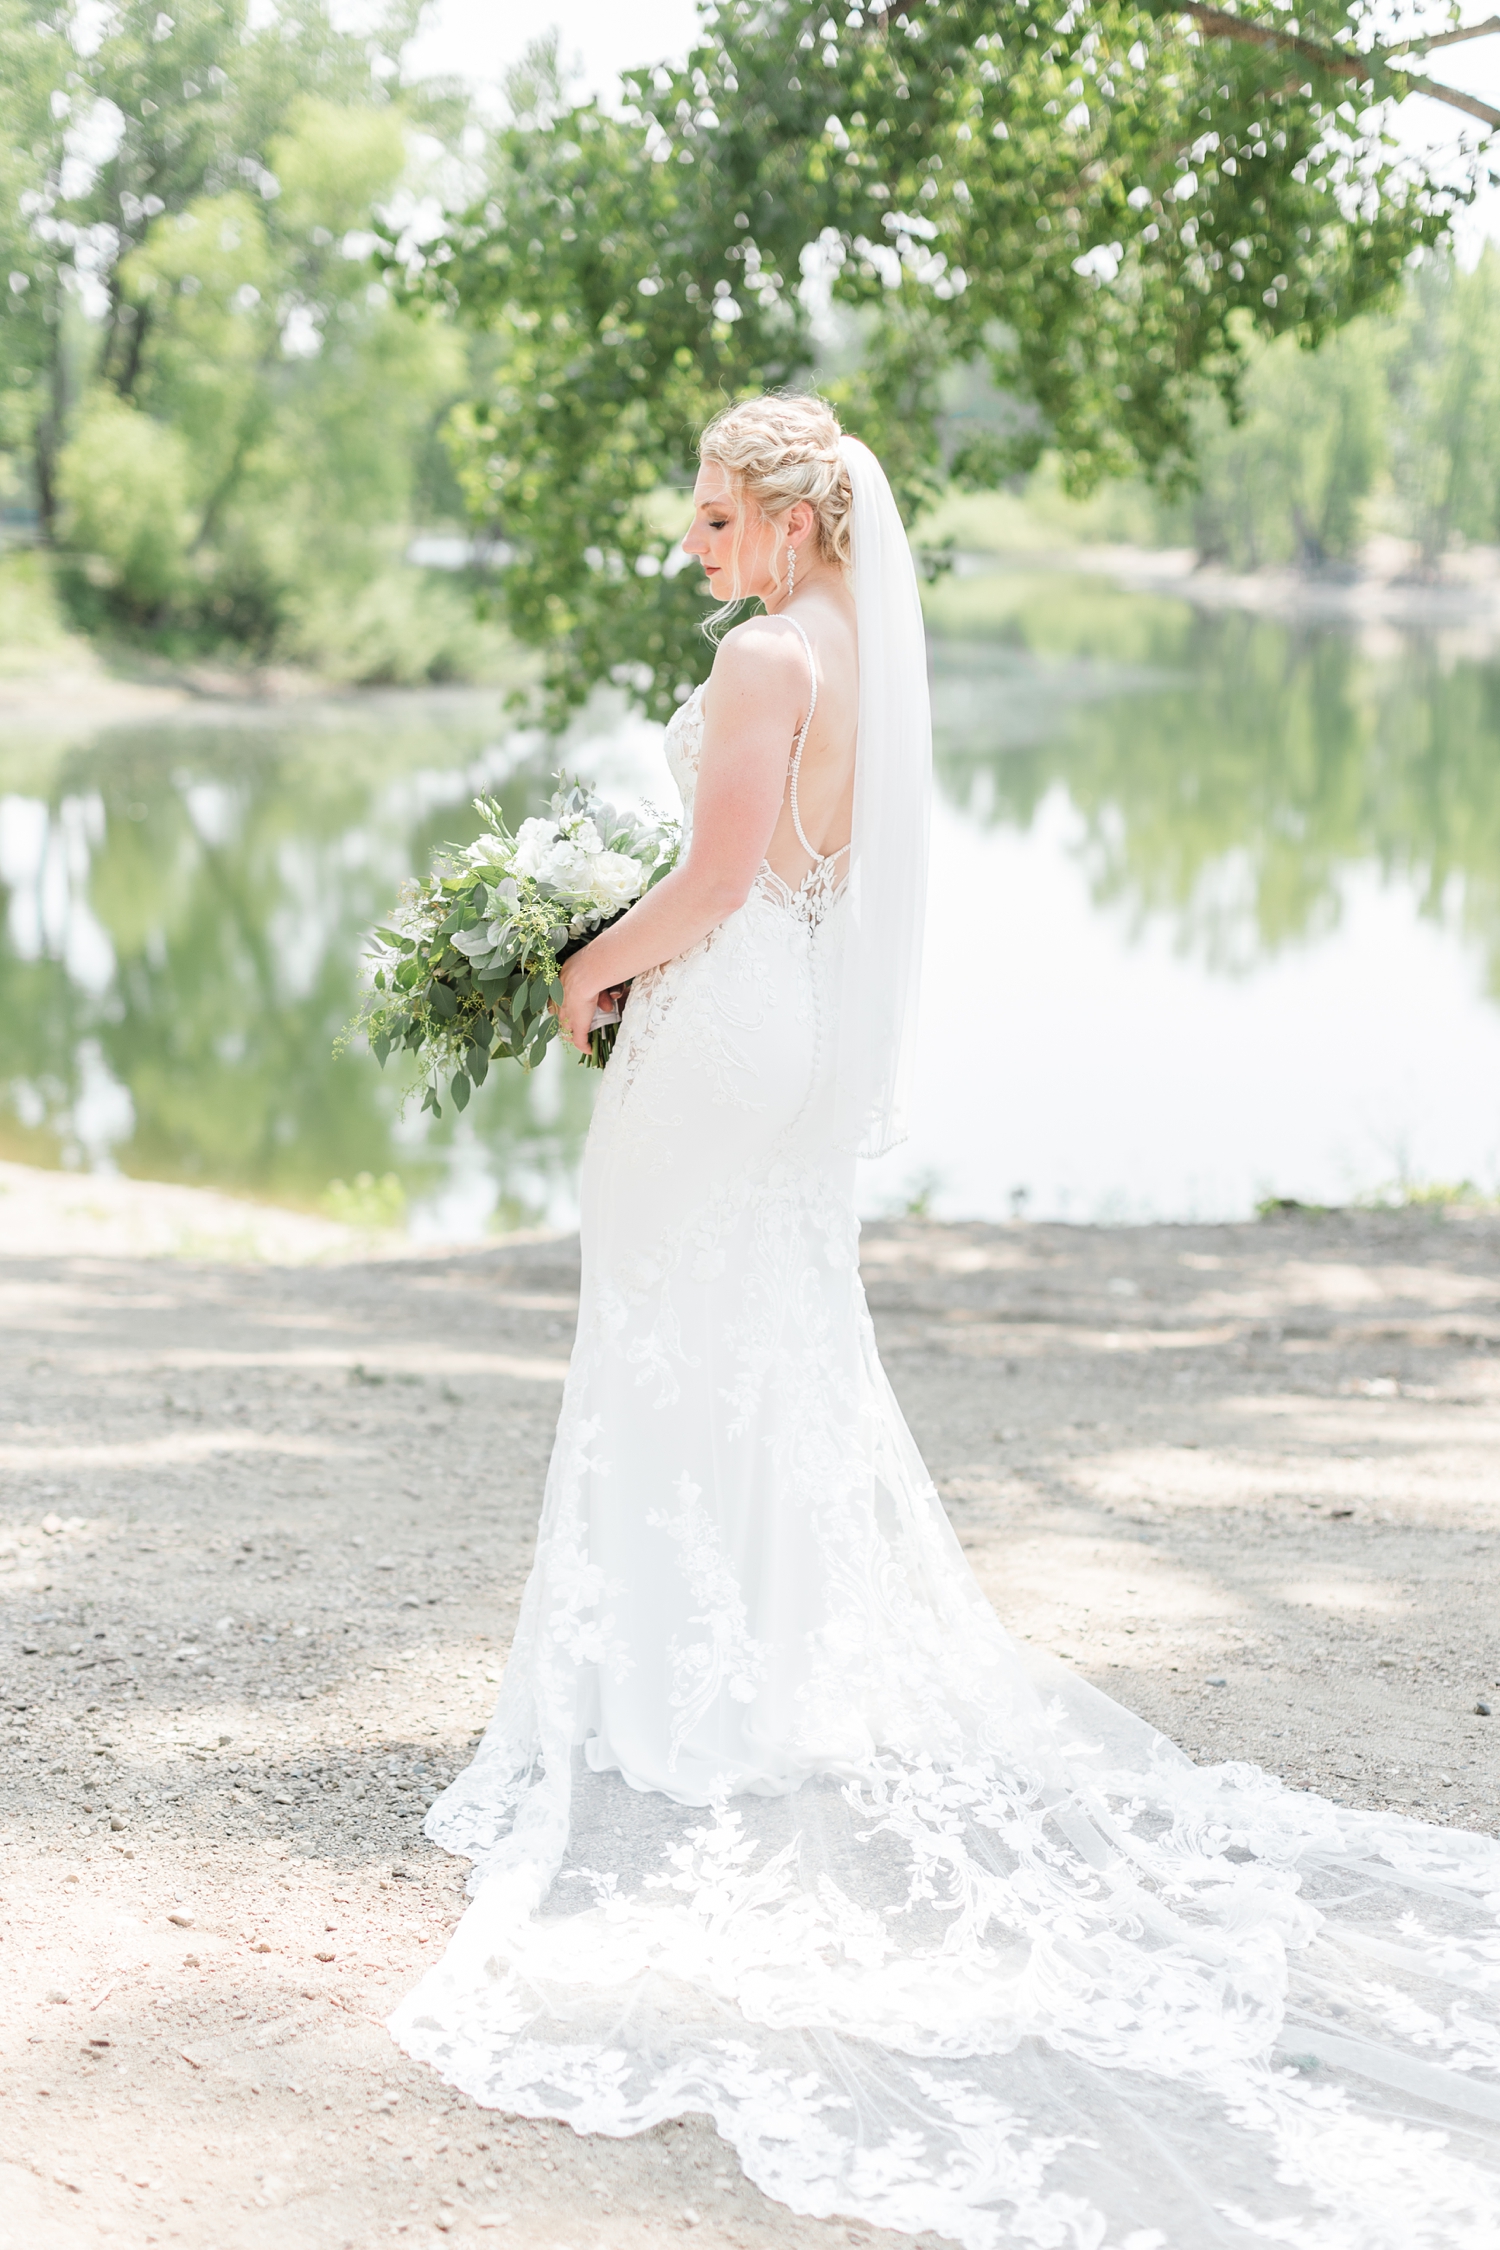 Alli stuns in her Enzoani bridal gown as she stands next to the lake at Wildhaven | CB Studio